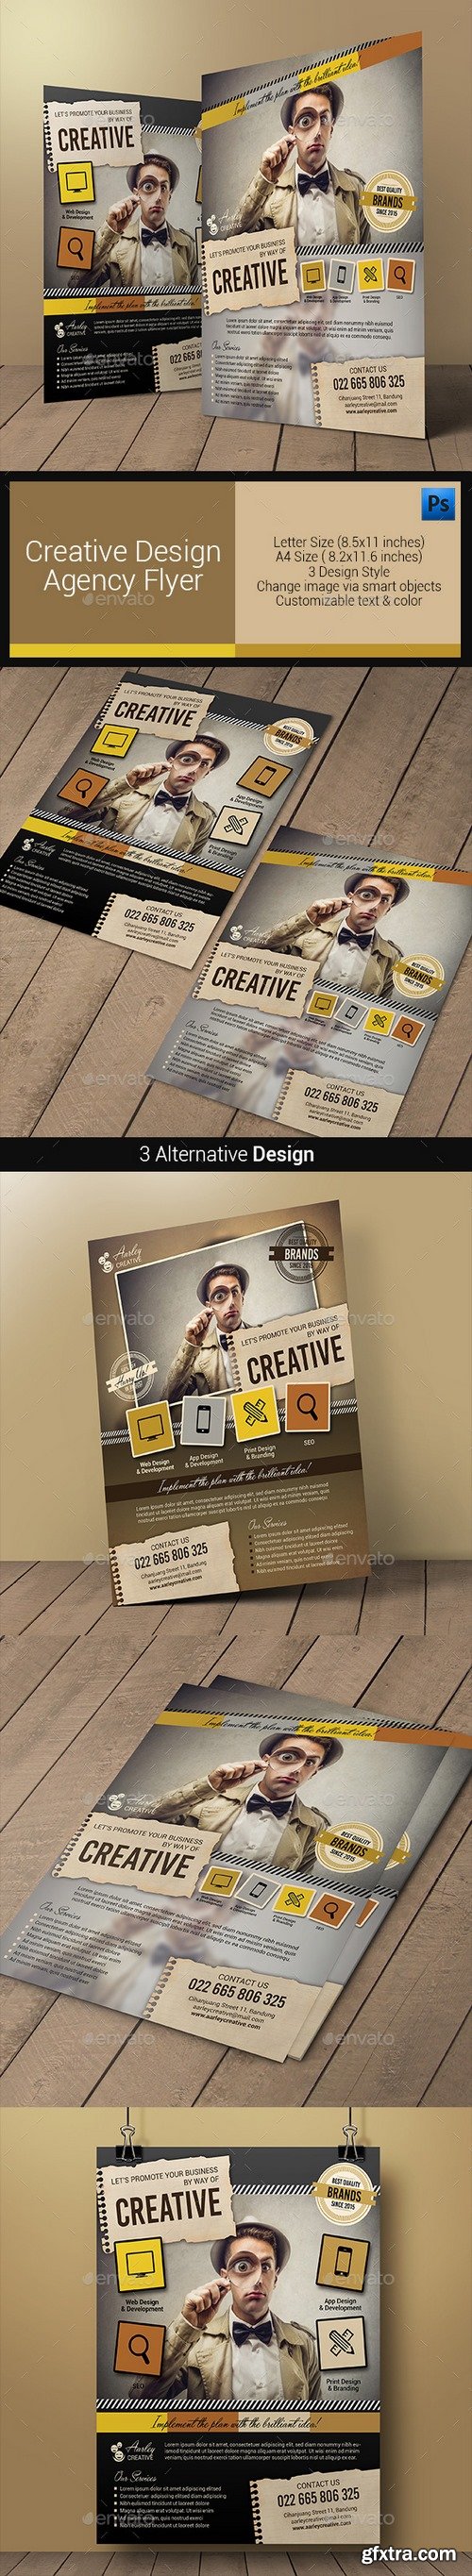 Graphicriver - Creative Design Agency Flyers 10880677